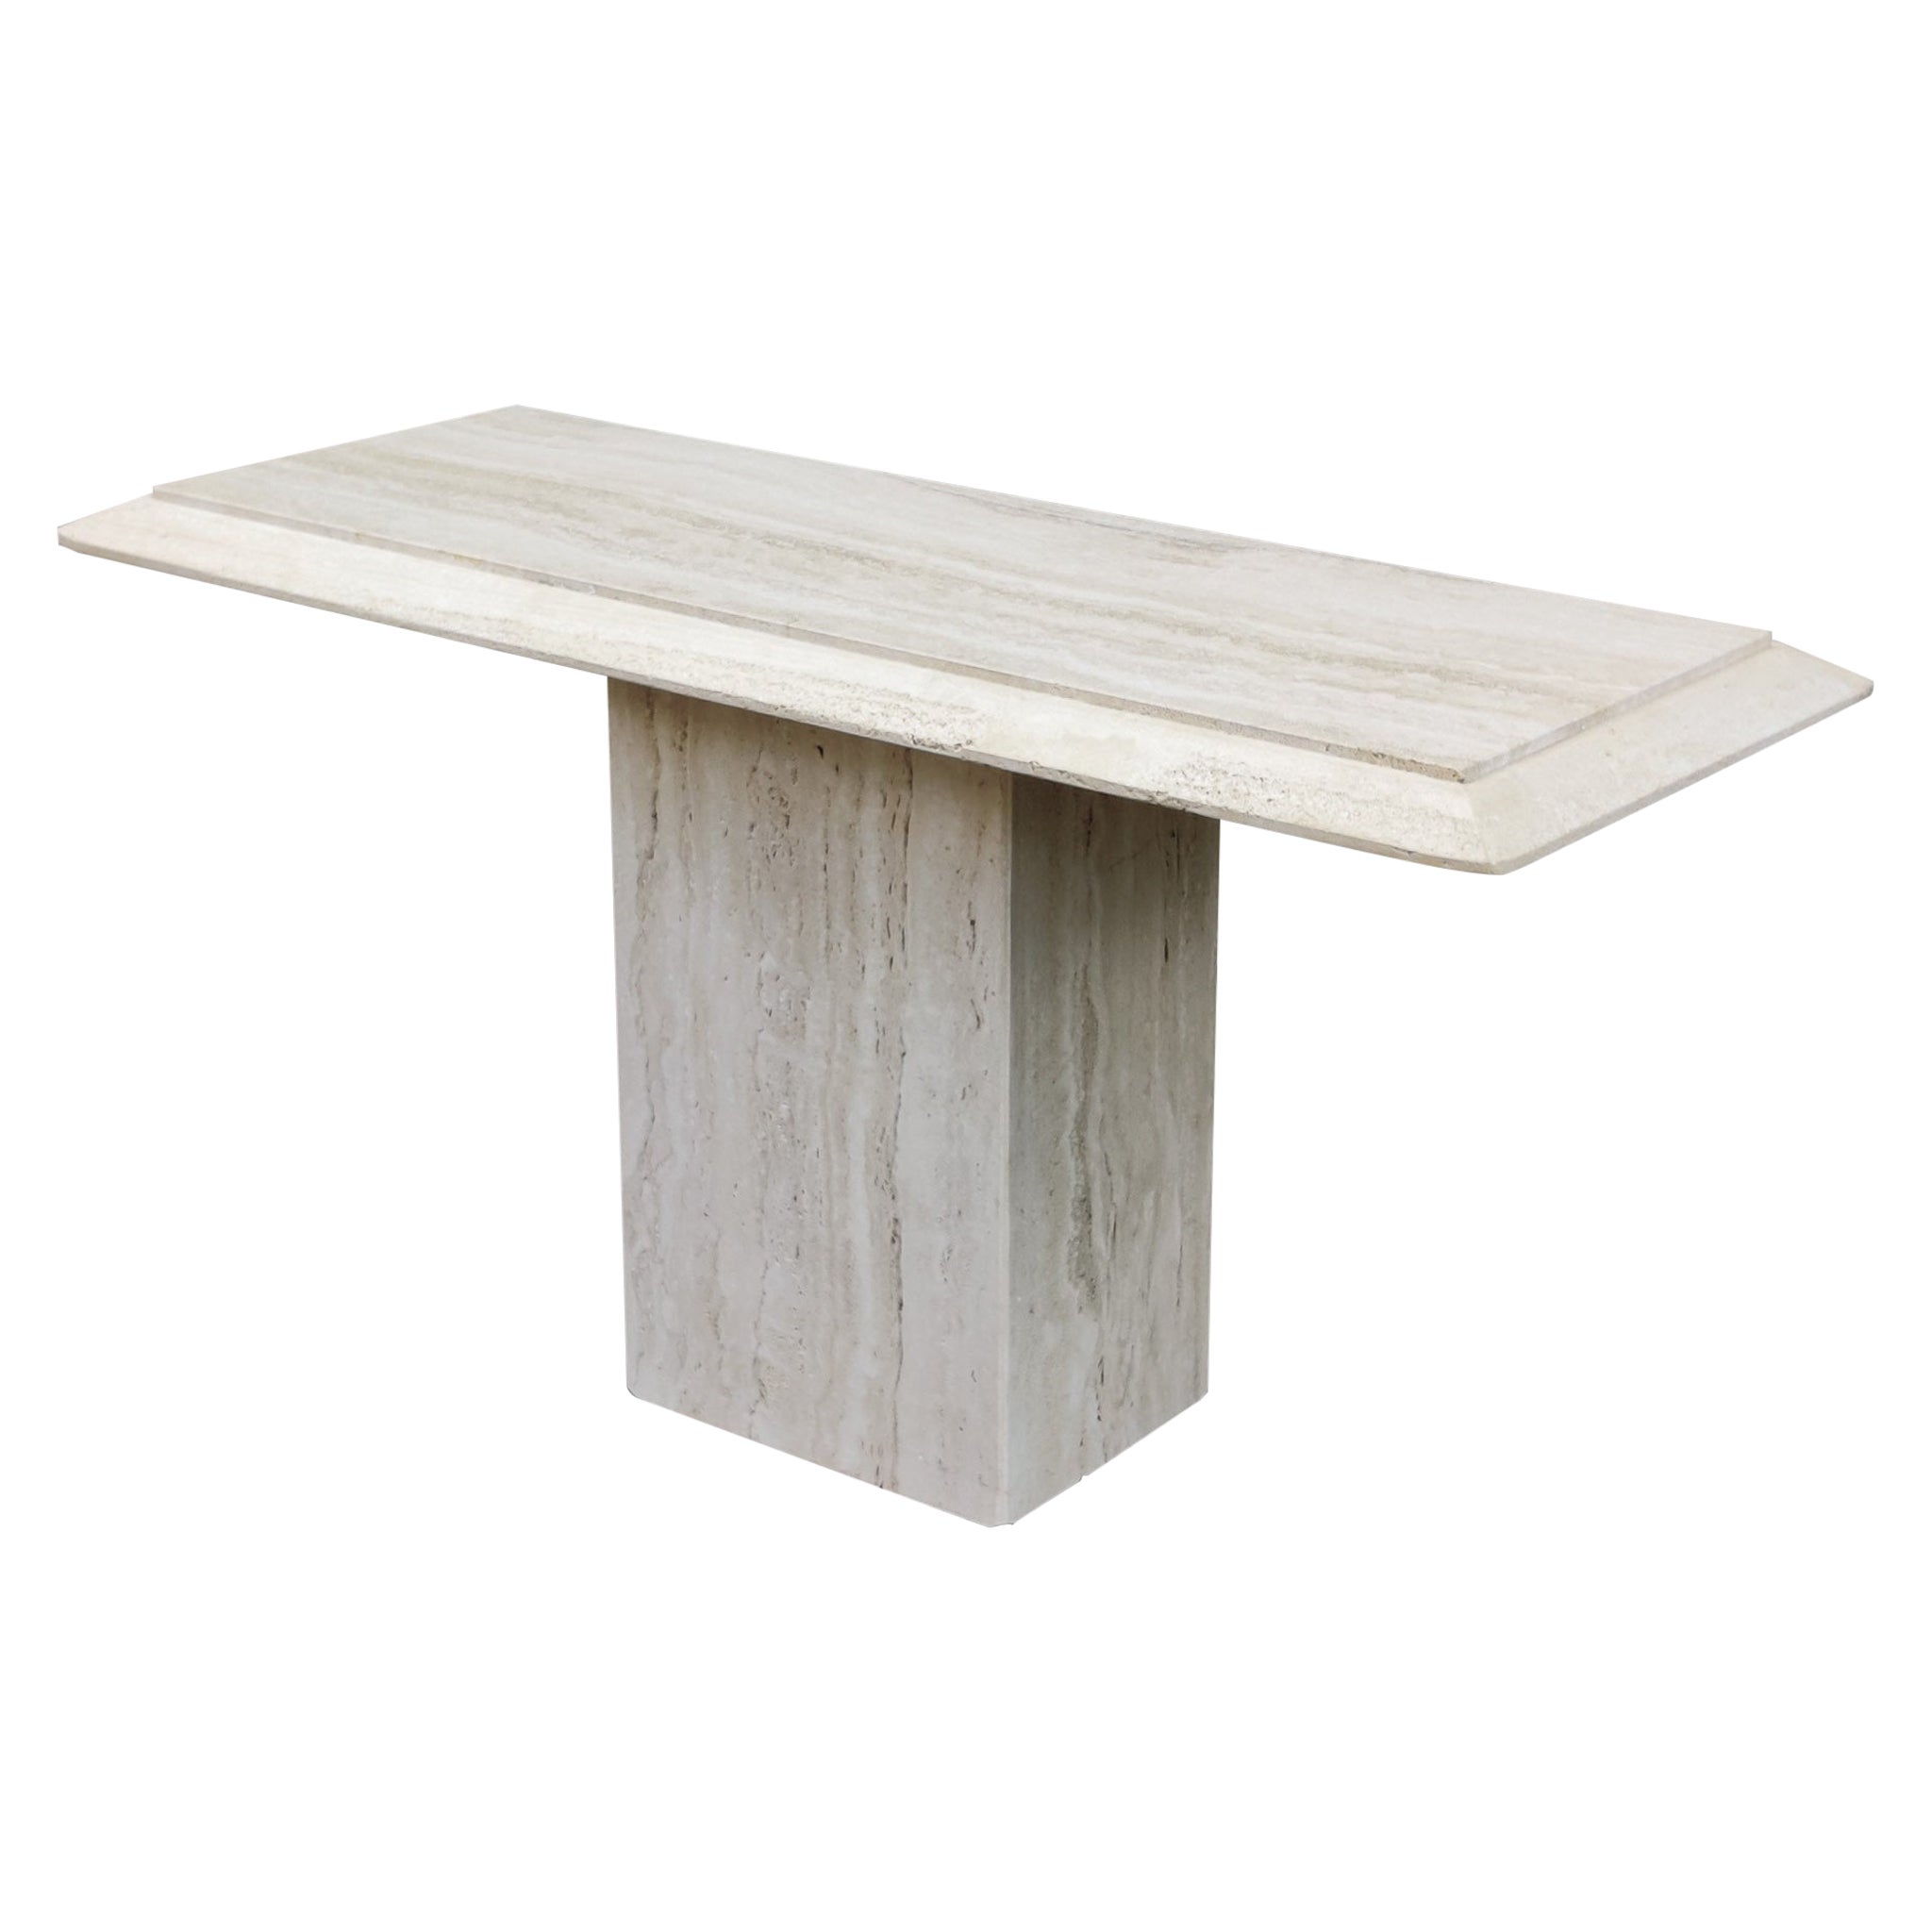 Stone International Console Tables